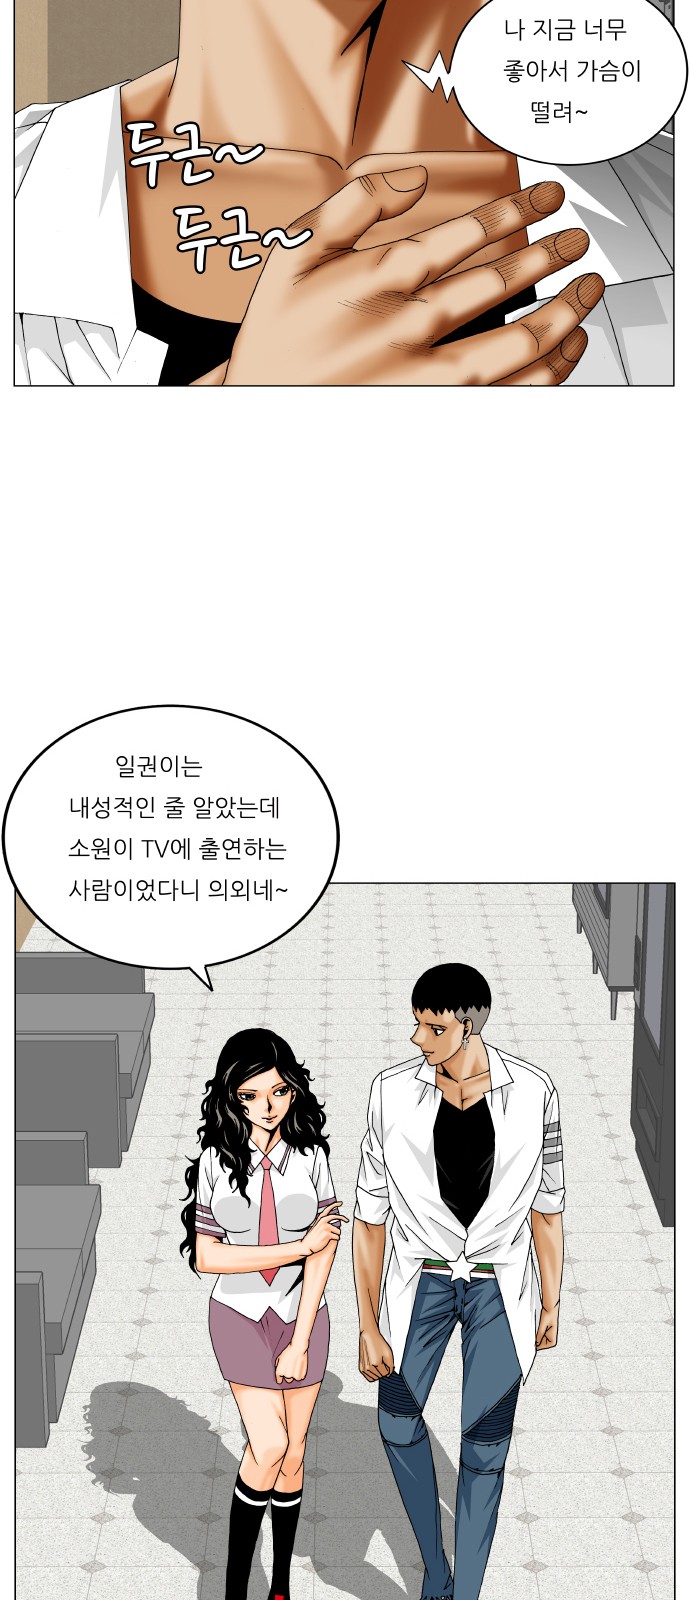 Ultimate Legend - Kang Hae Hyo - Chapter 319 - Page 2